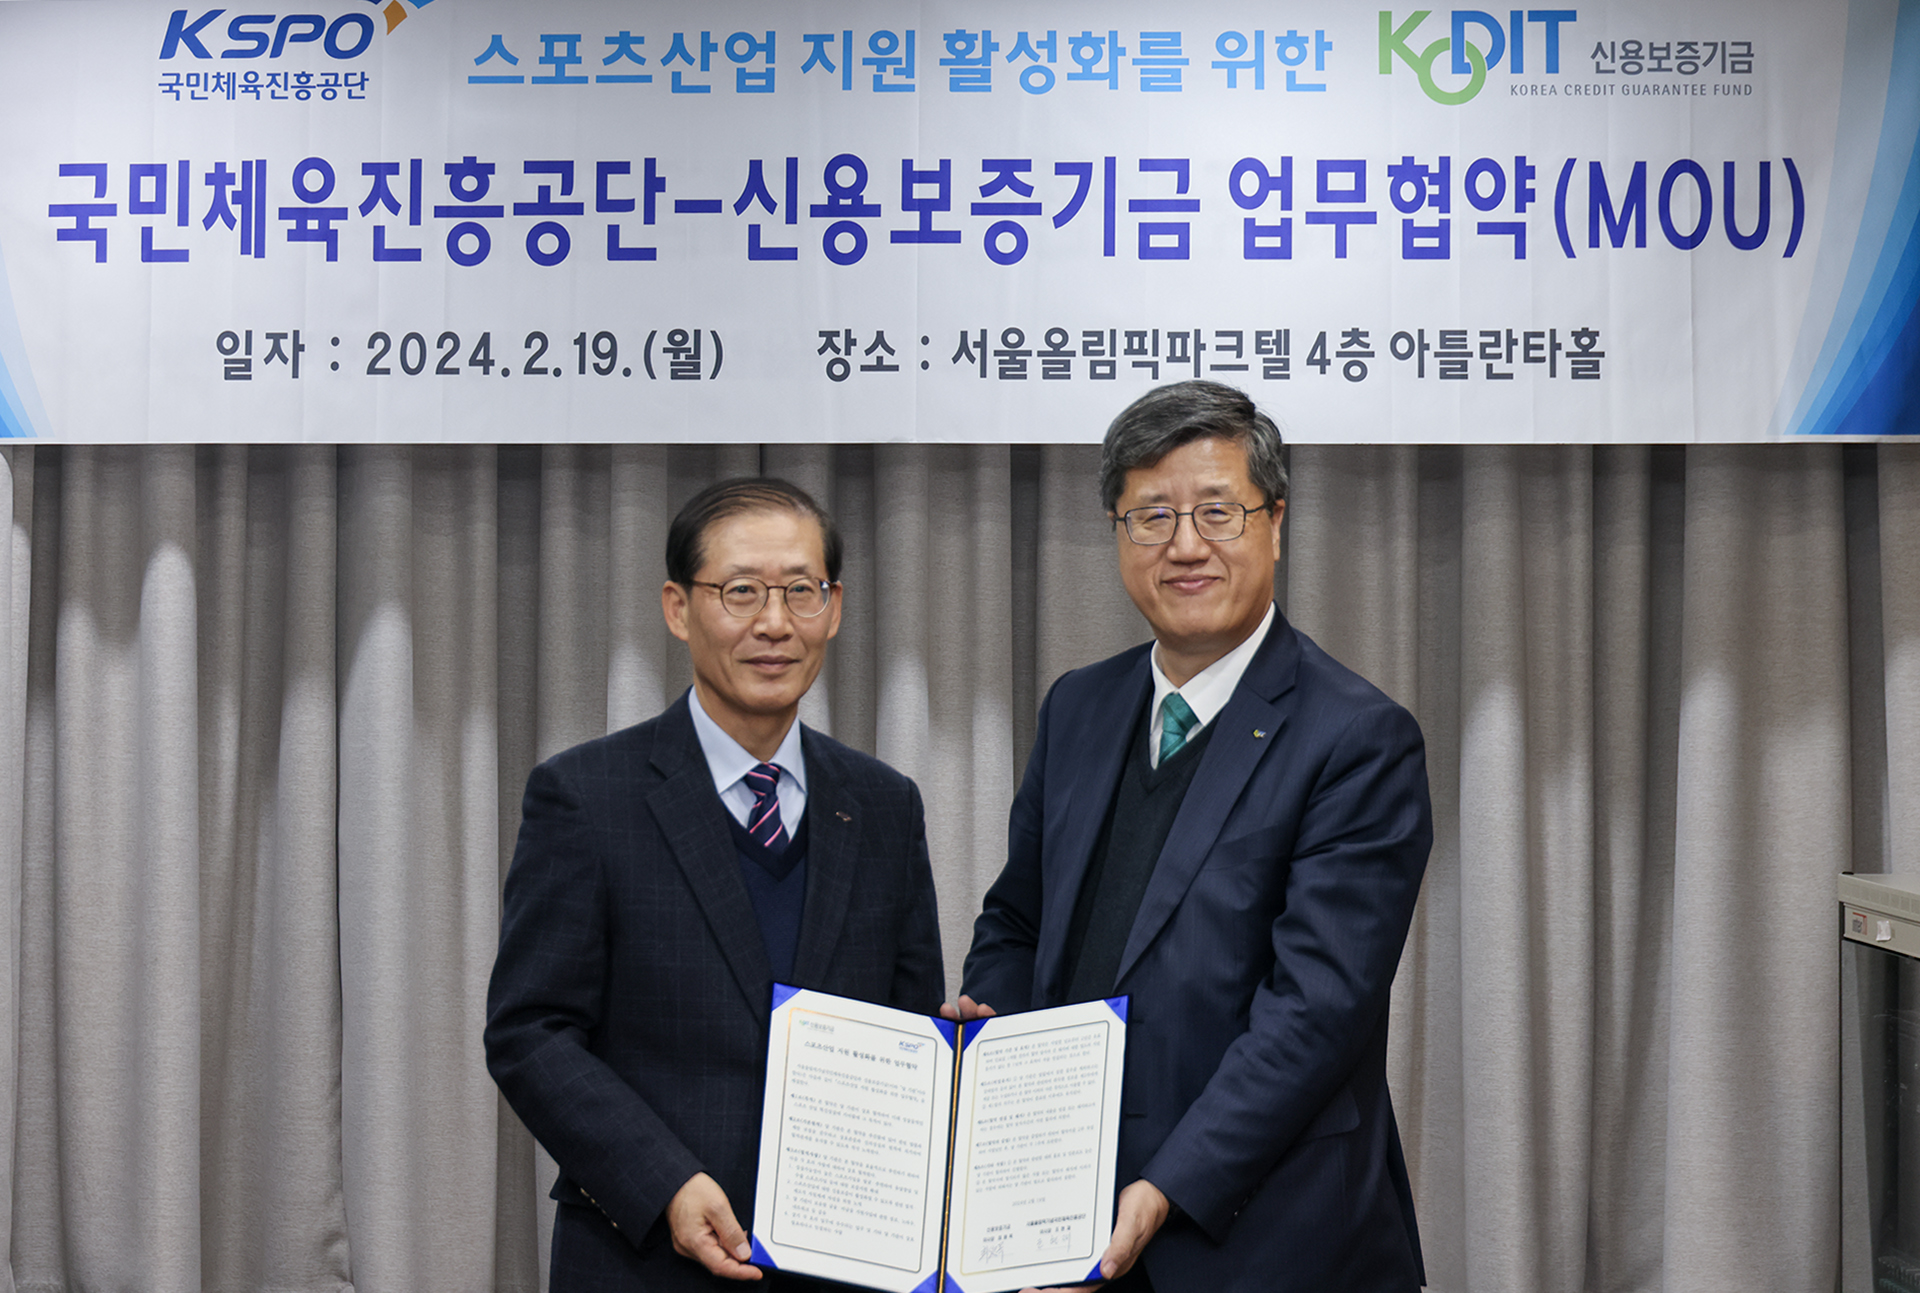 KODIT Signs an MOU on Promoting Sports Industry with Korea Sports promotion Foundation (February 20, 2024) images